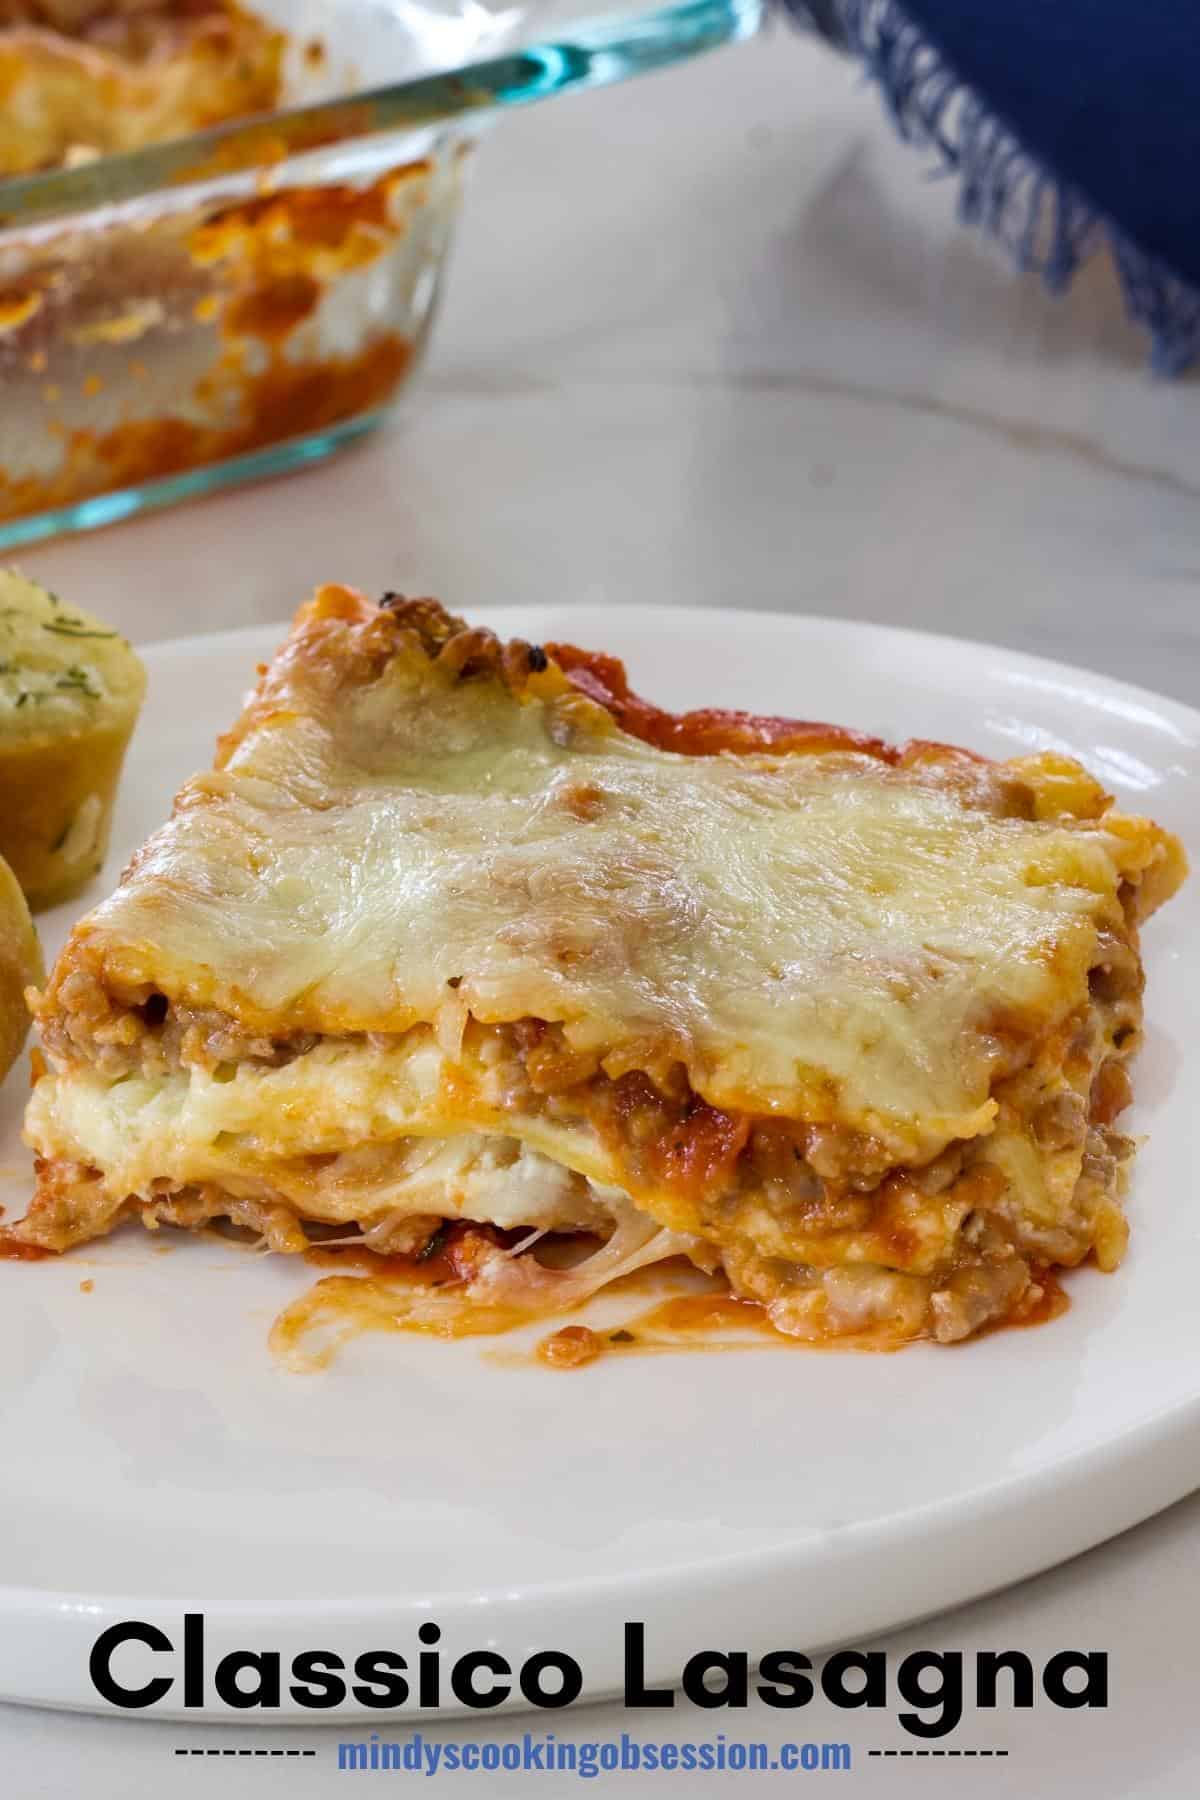 Quick & Easy Classico Lasagna Recipe (with jar sauce) is so simple, only requires 7 ingredients and is sure to become a family favorite! via @mindyscookingobsession